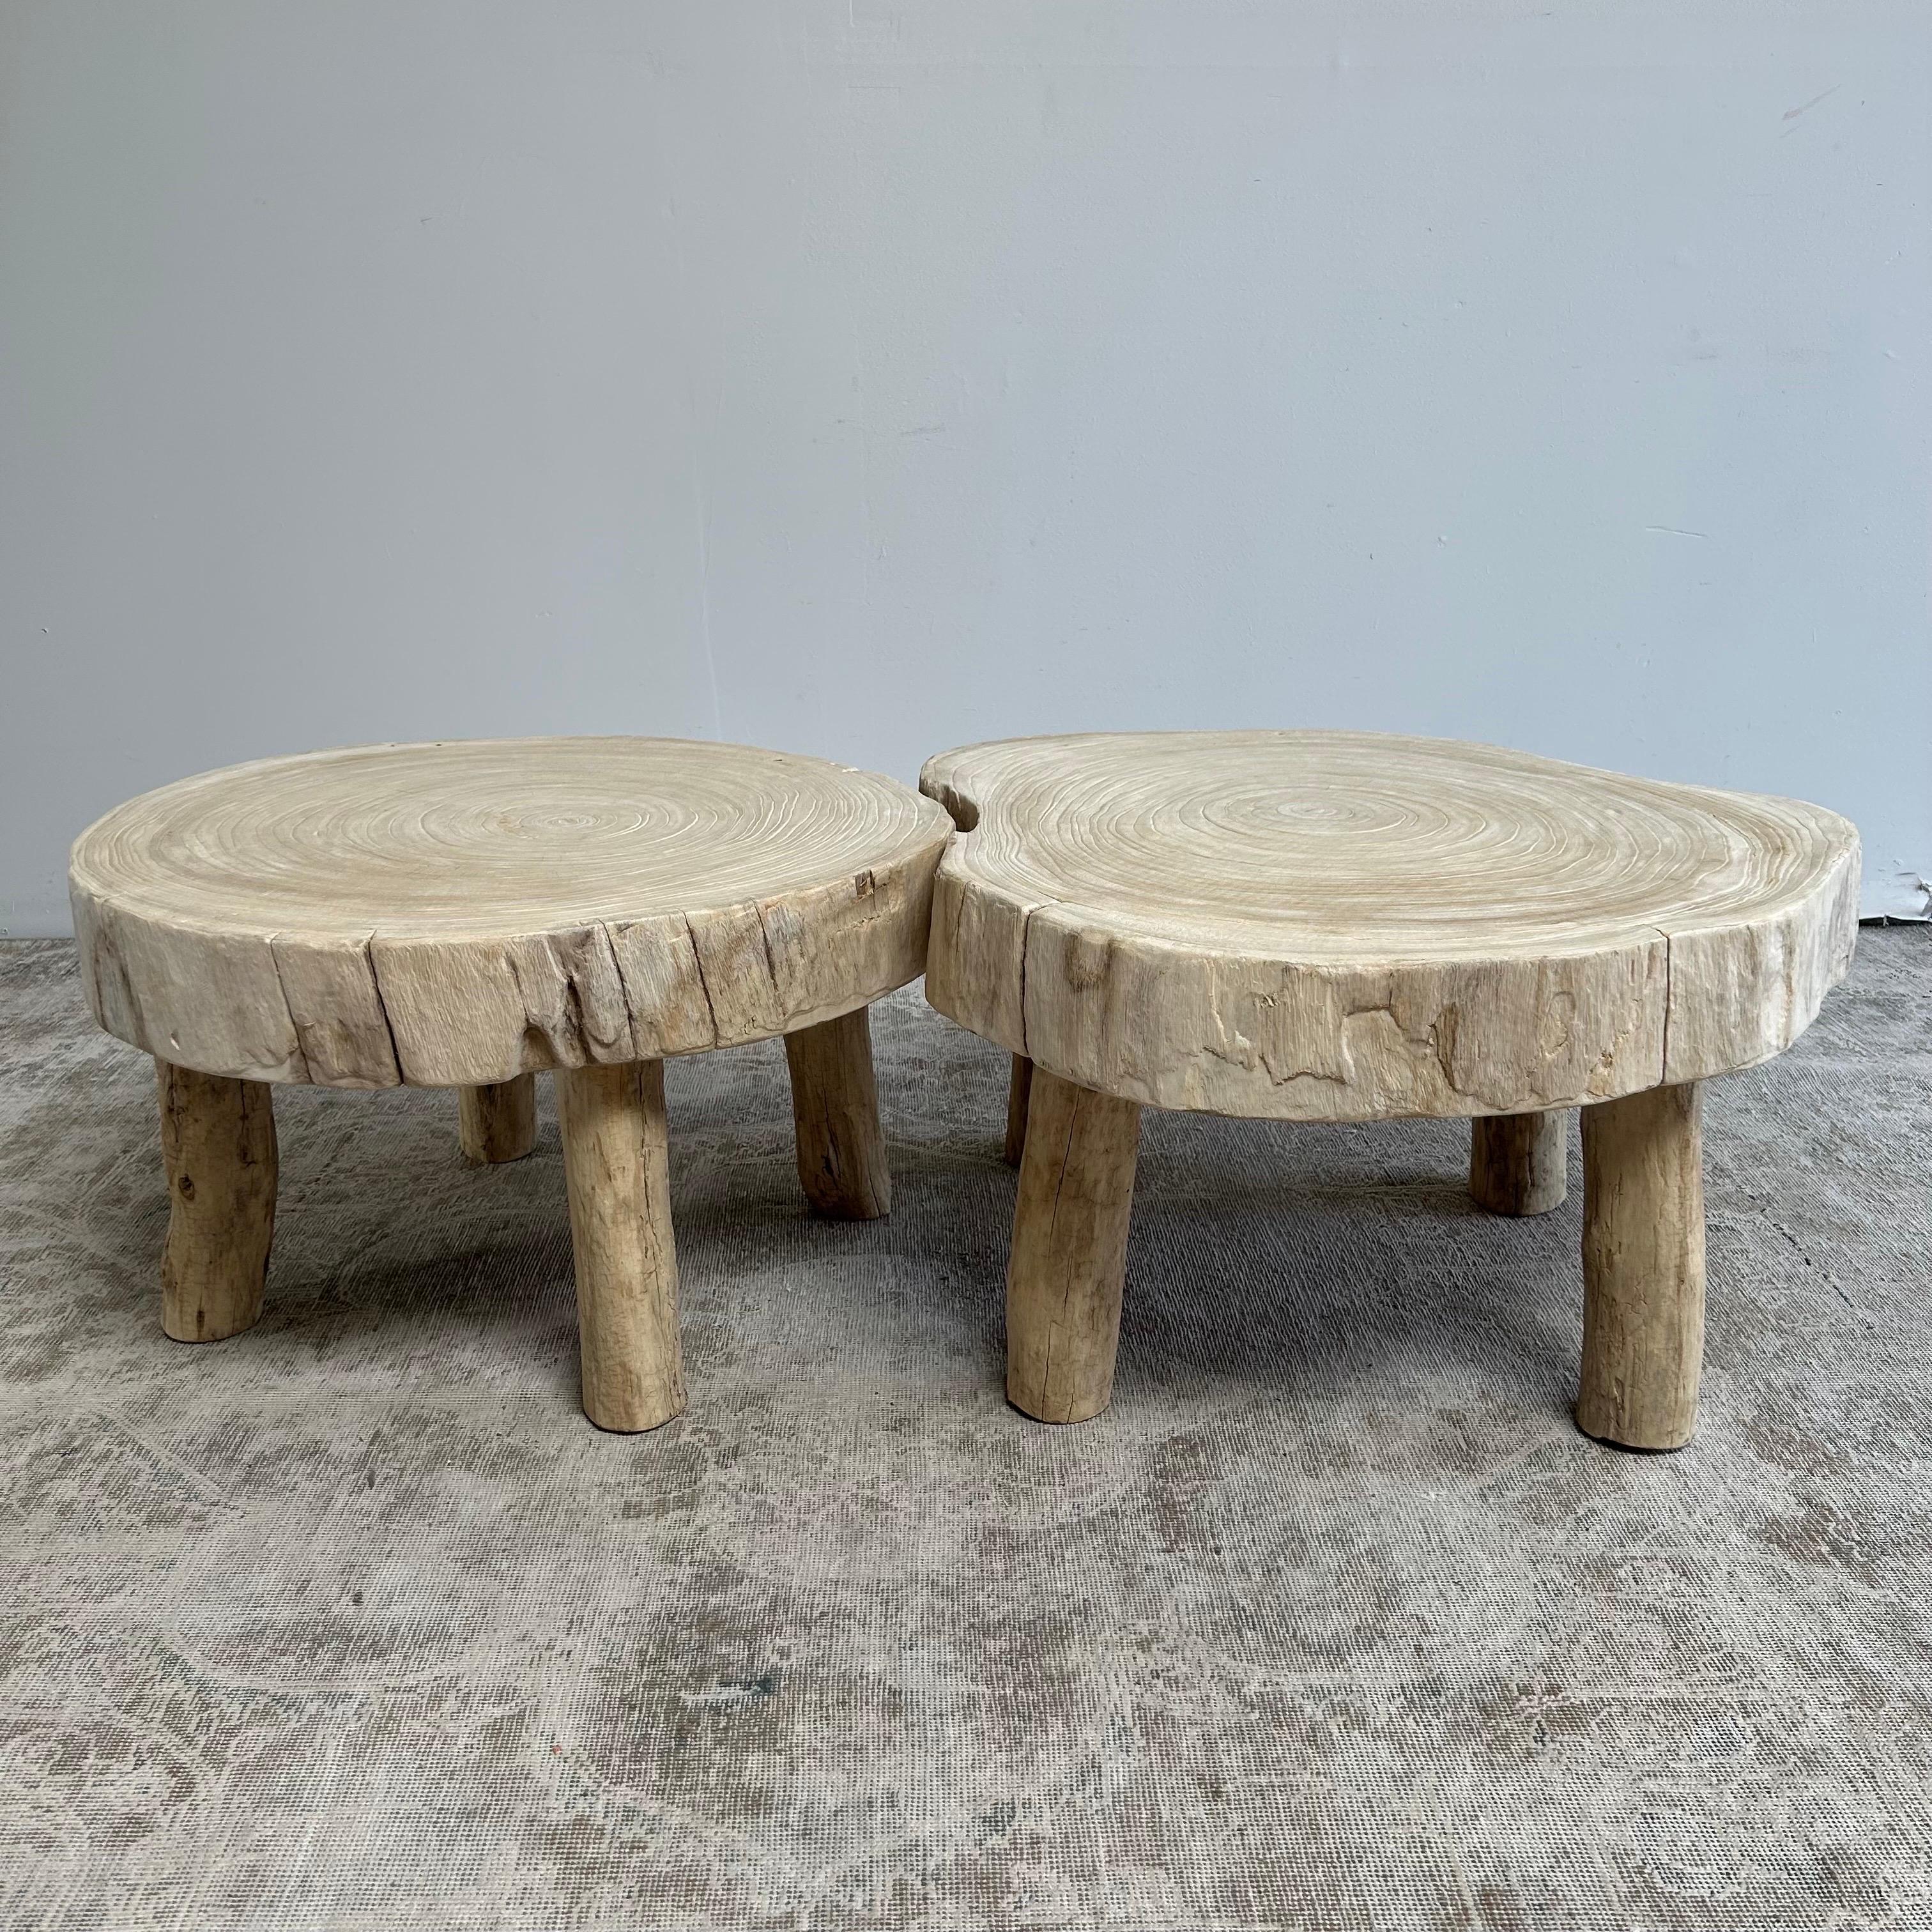 Cypress slice stump coffee tables pair
These just happened to work perfectly together so we paired them up. Use them against each other or separate them, they make the perfect pair of tables to set in front of a sofa.
Size of each item:
33” rd. X